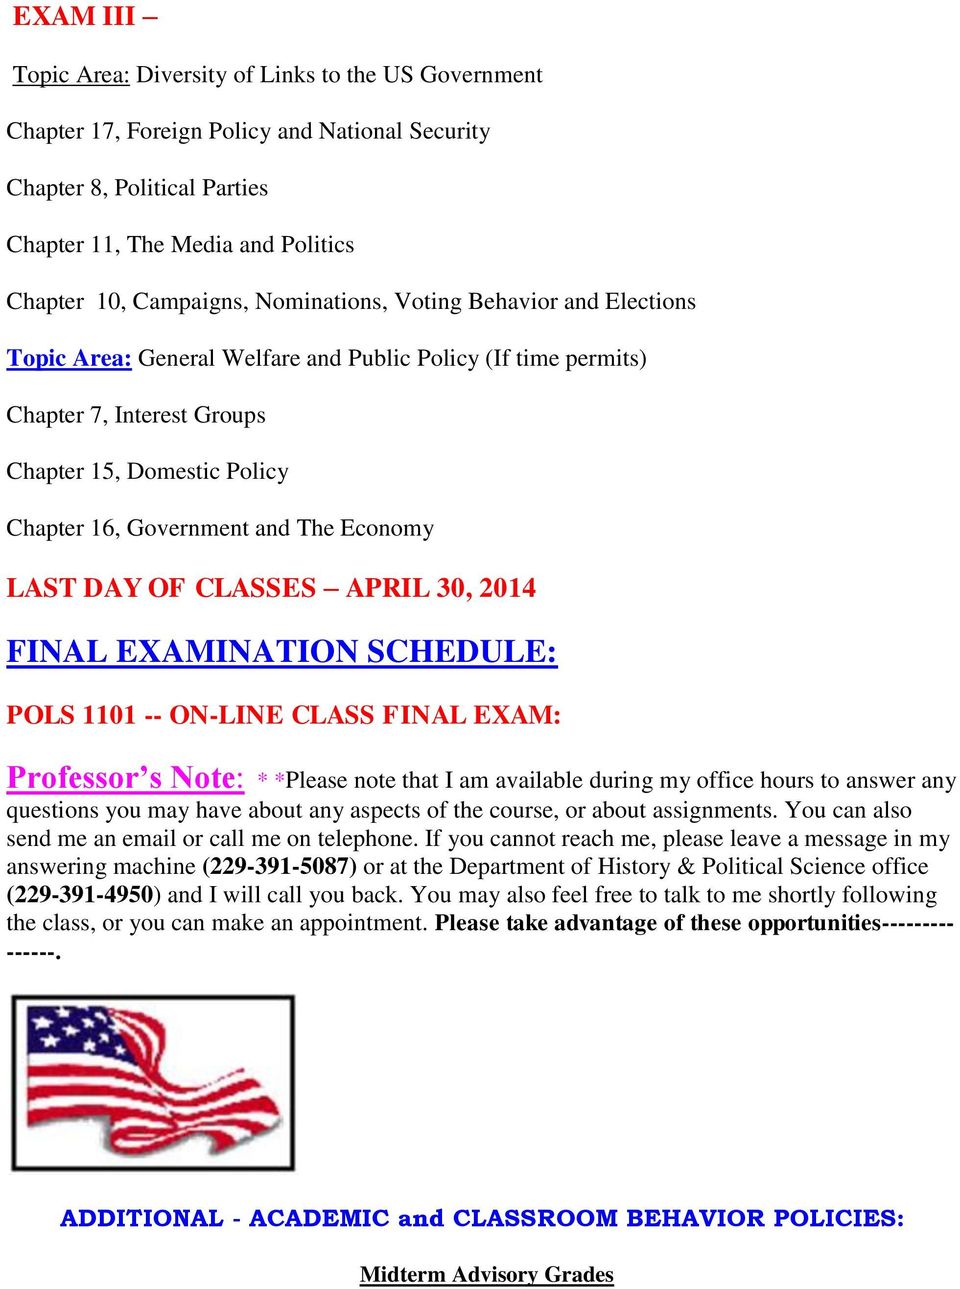 Economy LAST DAY OF CLASSES APRIL 30, 2014 FINAL EXAMINATION SCHEDULE: POLS 1101 -- ON-LINE CLASS FINAL EXAM: Professor s Note: * *Please note that I am available during my office hours to answer any